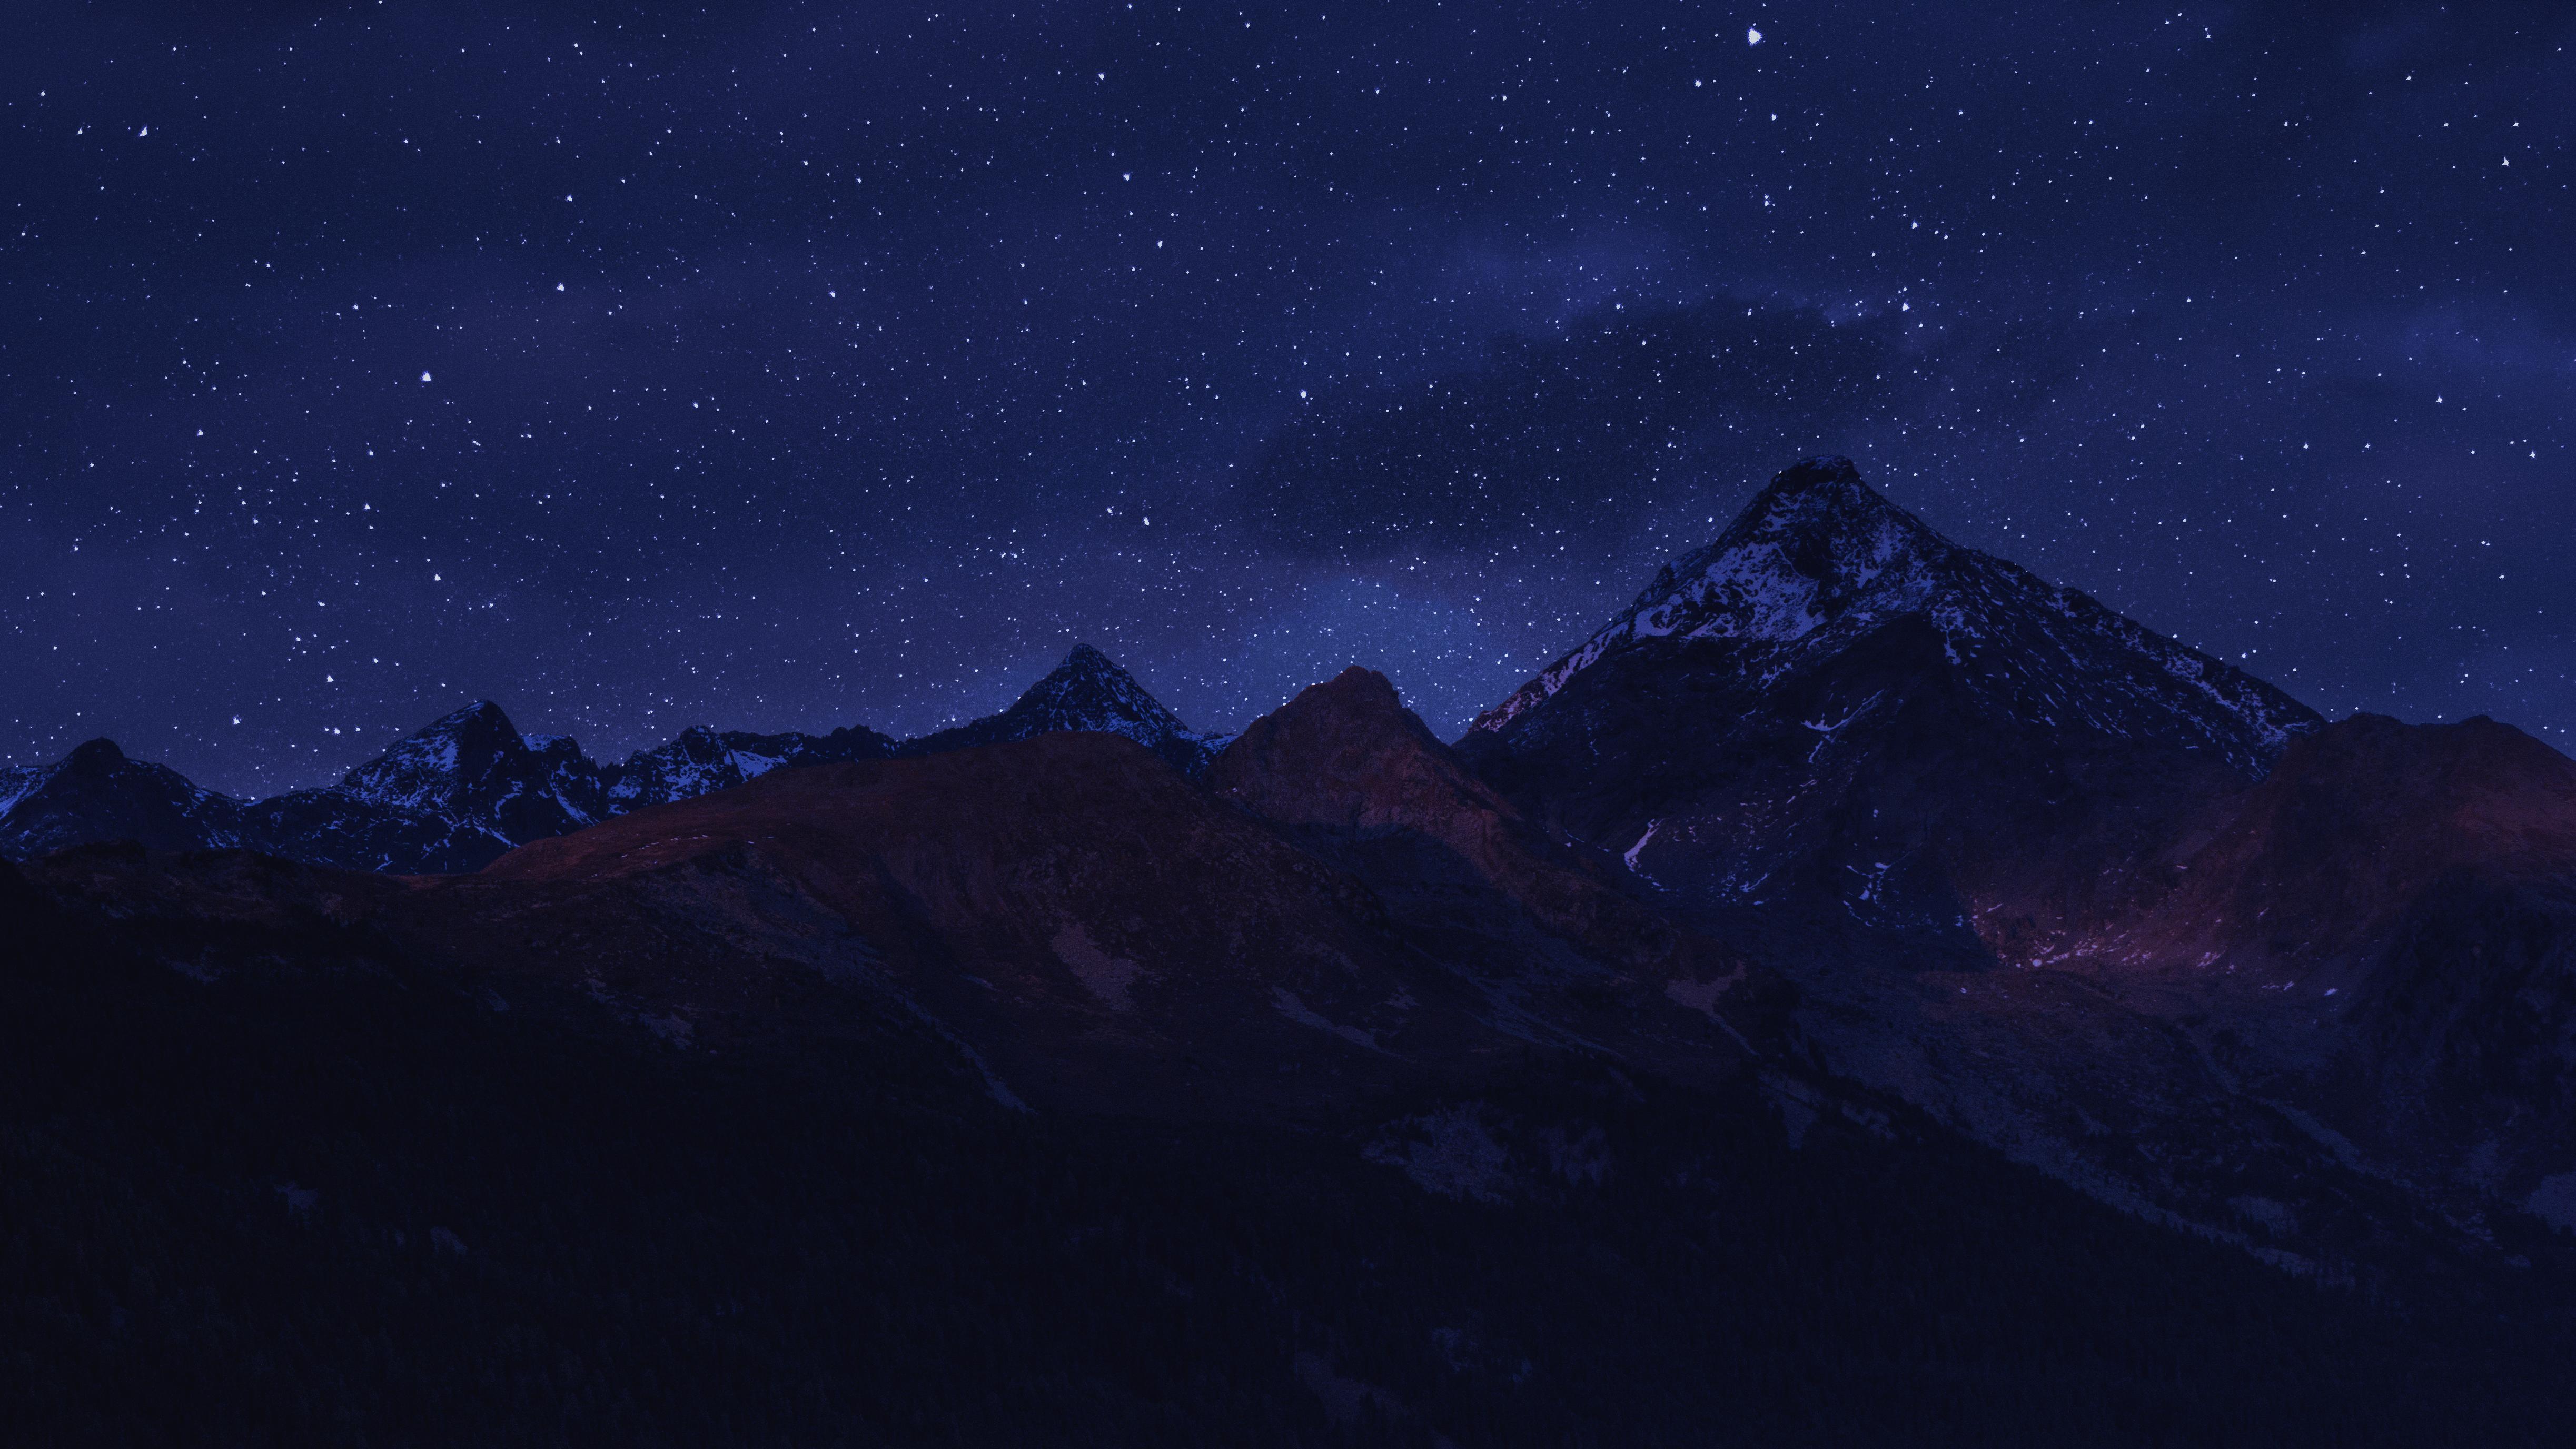 Day and Night Cycle Mountain Wallpaper [4892x2752]